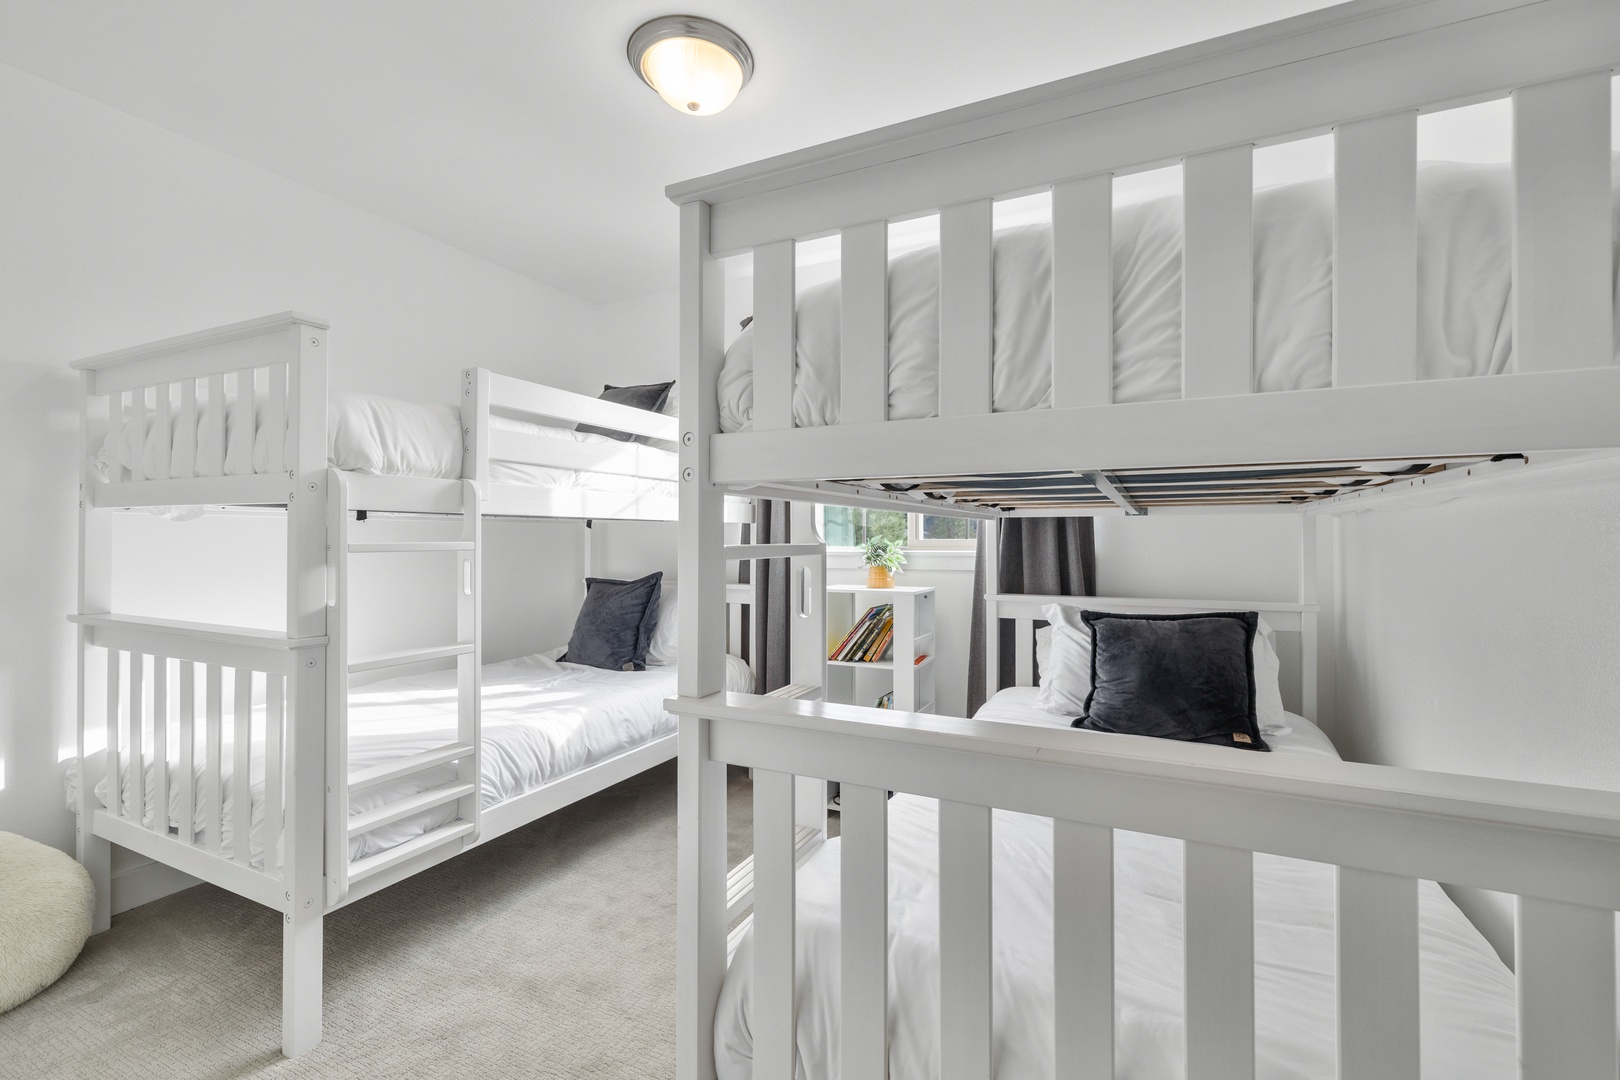 The final 2nd floor bedroom includes two twin-over-twin bunkbeds